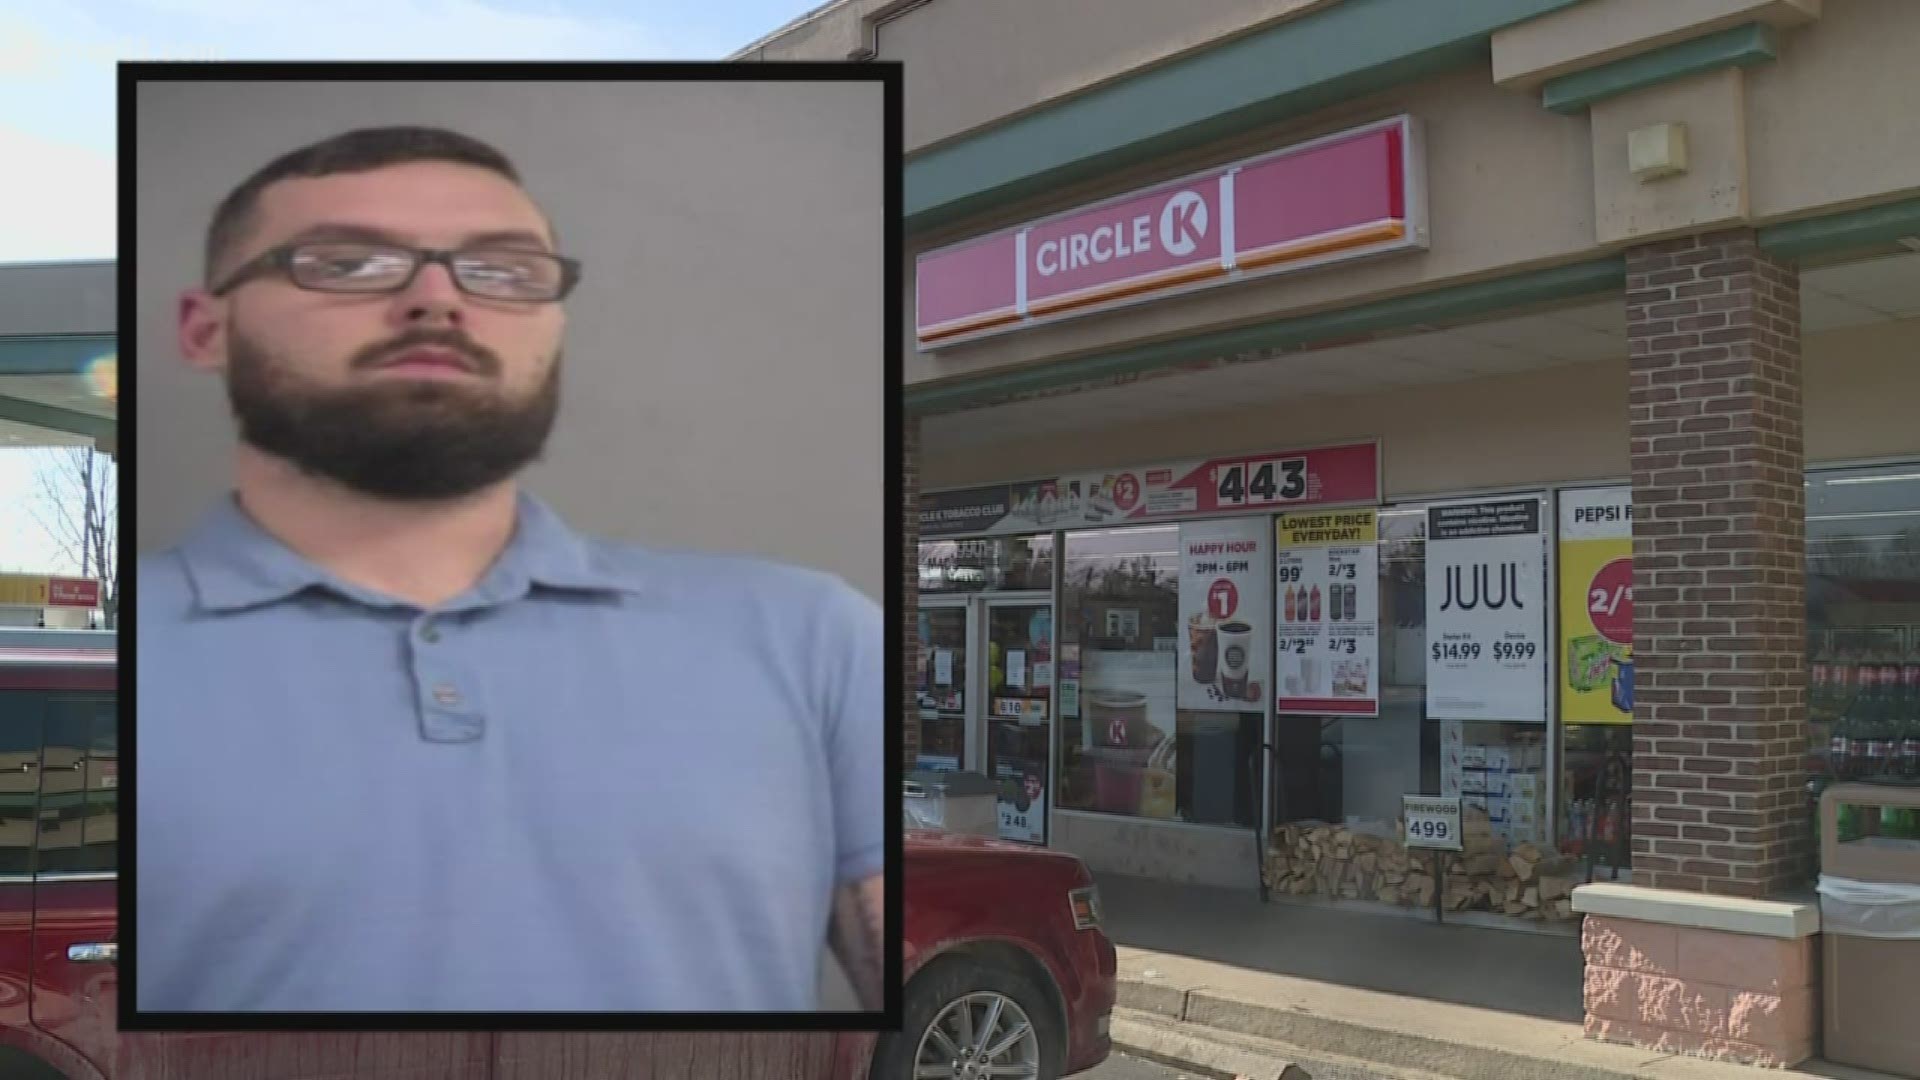 Adam Theobald admitted to police that he stole $8,000 worth of lottery tickets from the Circle K on LaGrange Road over a four-month period.